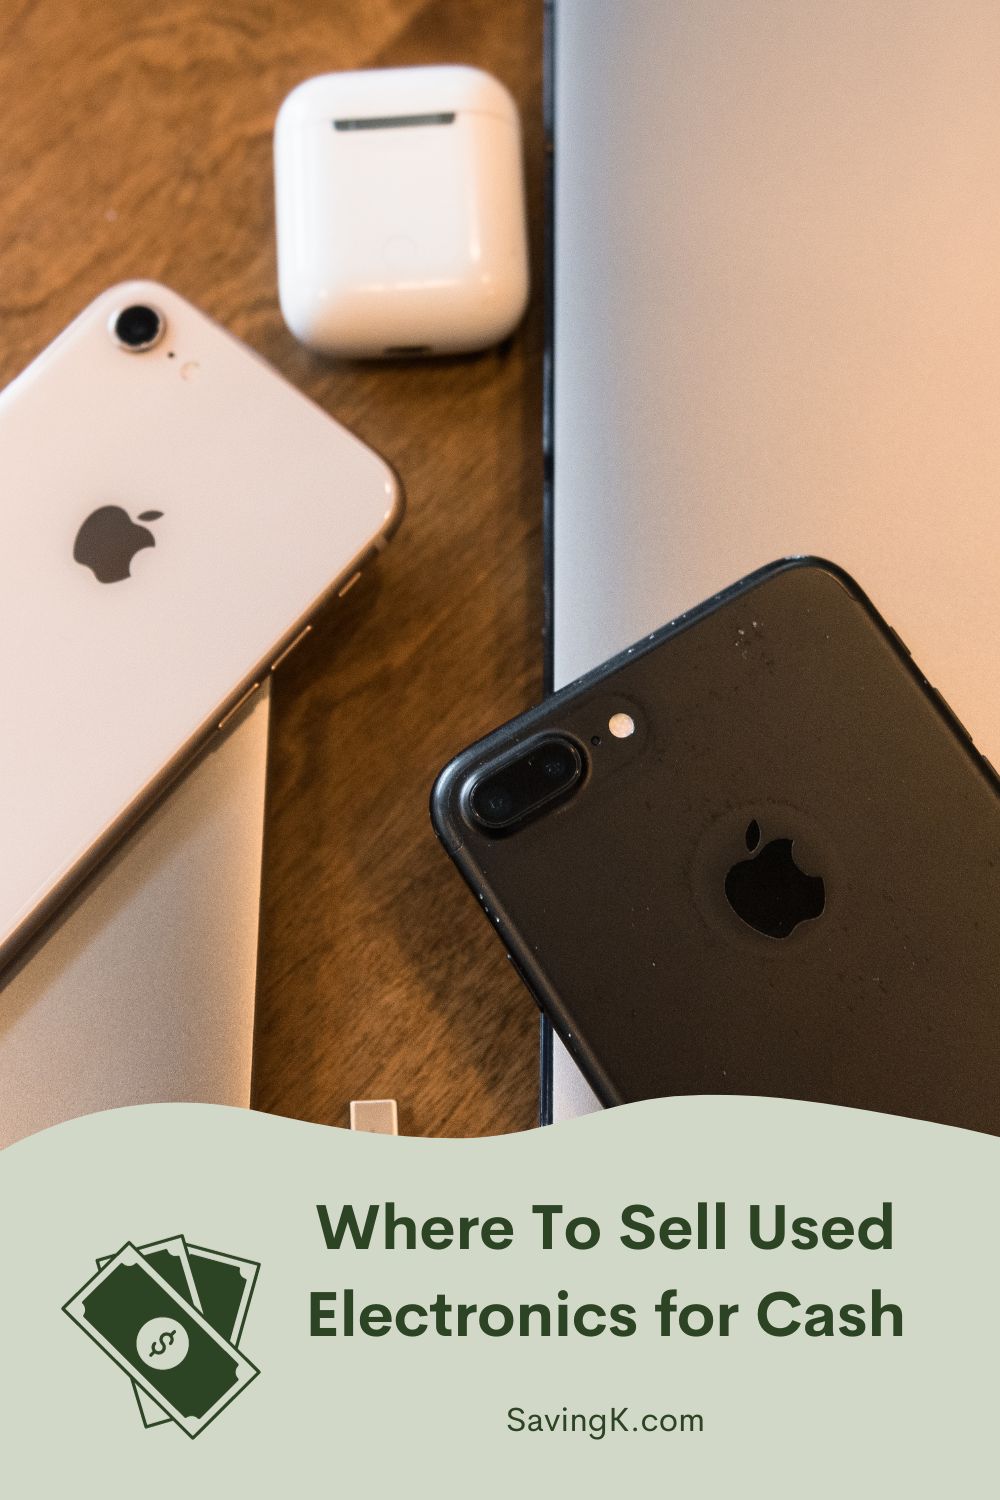 Where To Sell Used Electronics for Cash